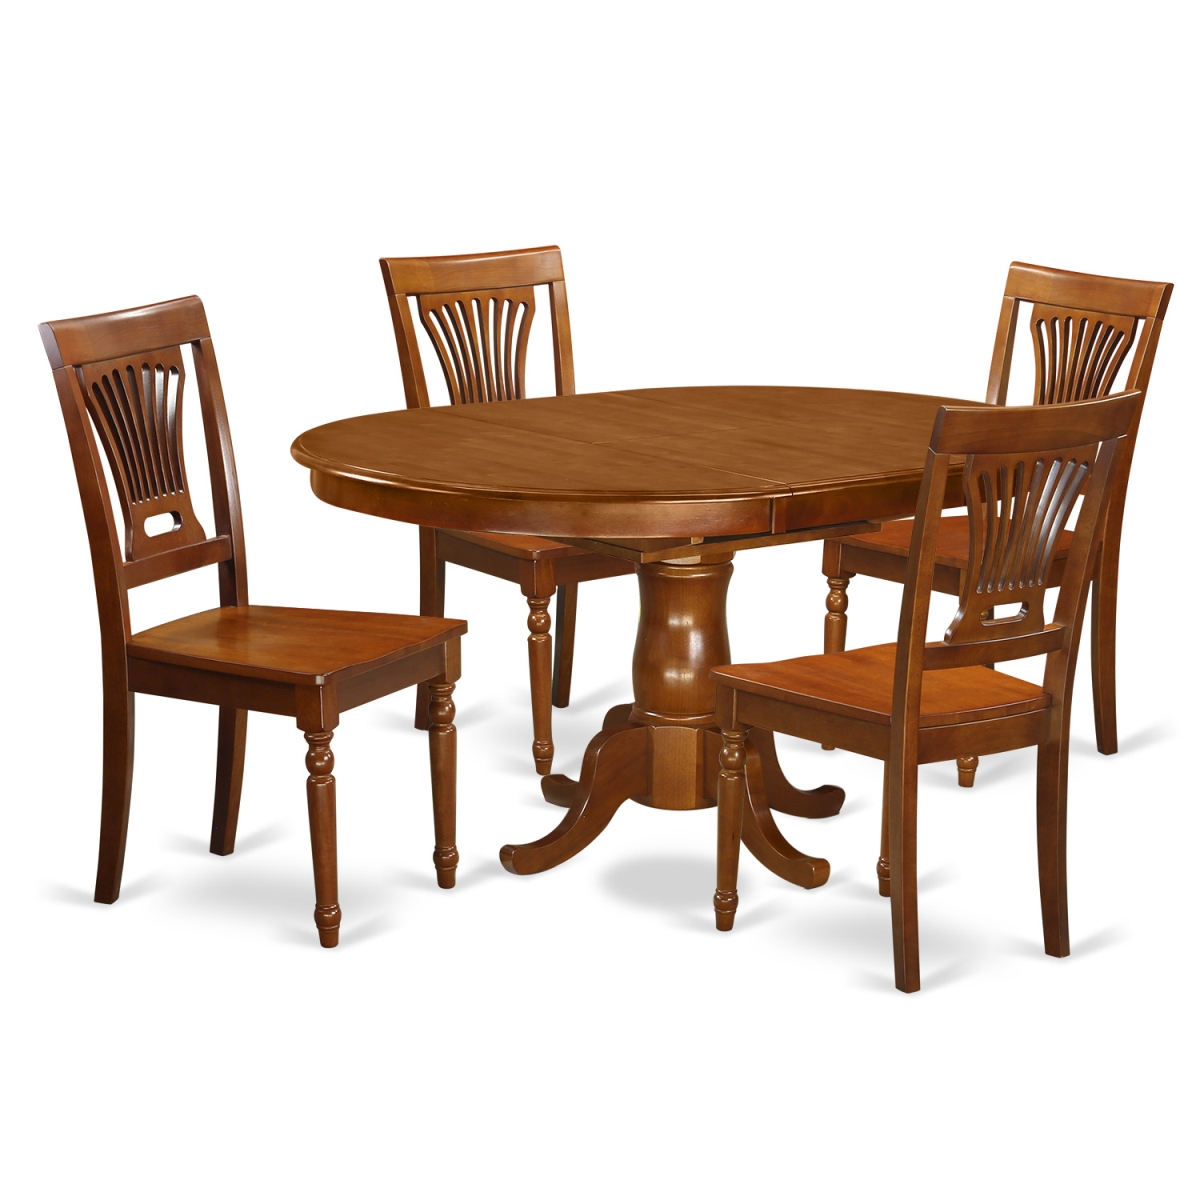 Picture of East West Furniture POPL5-SBR-W Wood Seat Portland Table with Leaf & Four Hard Chairs&#44; Saddle Brown - 18 in. - 5 Piece